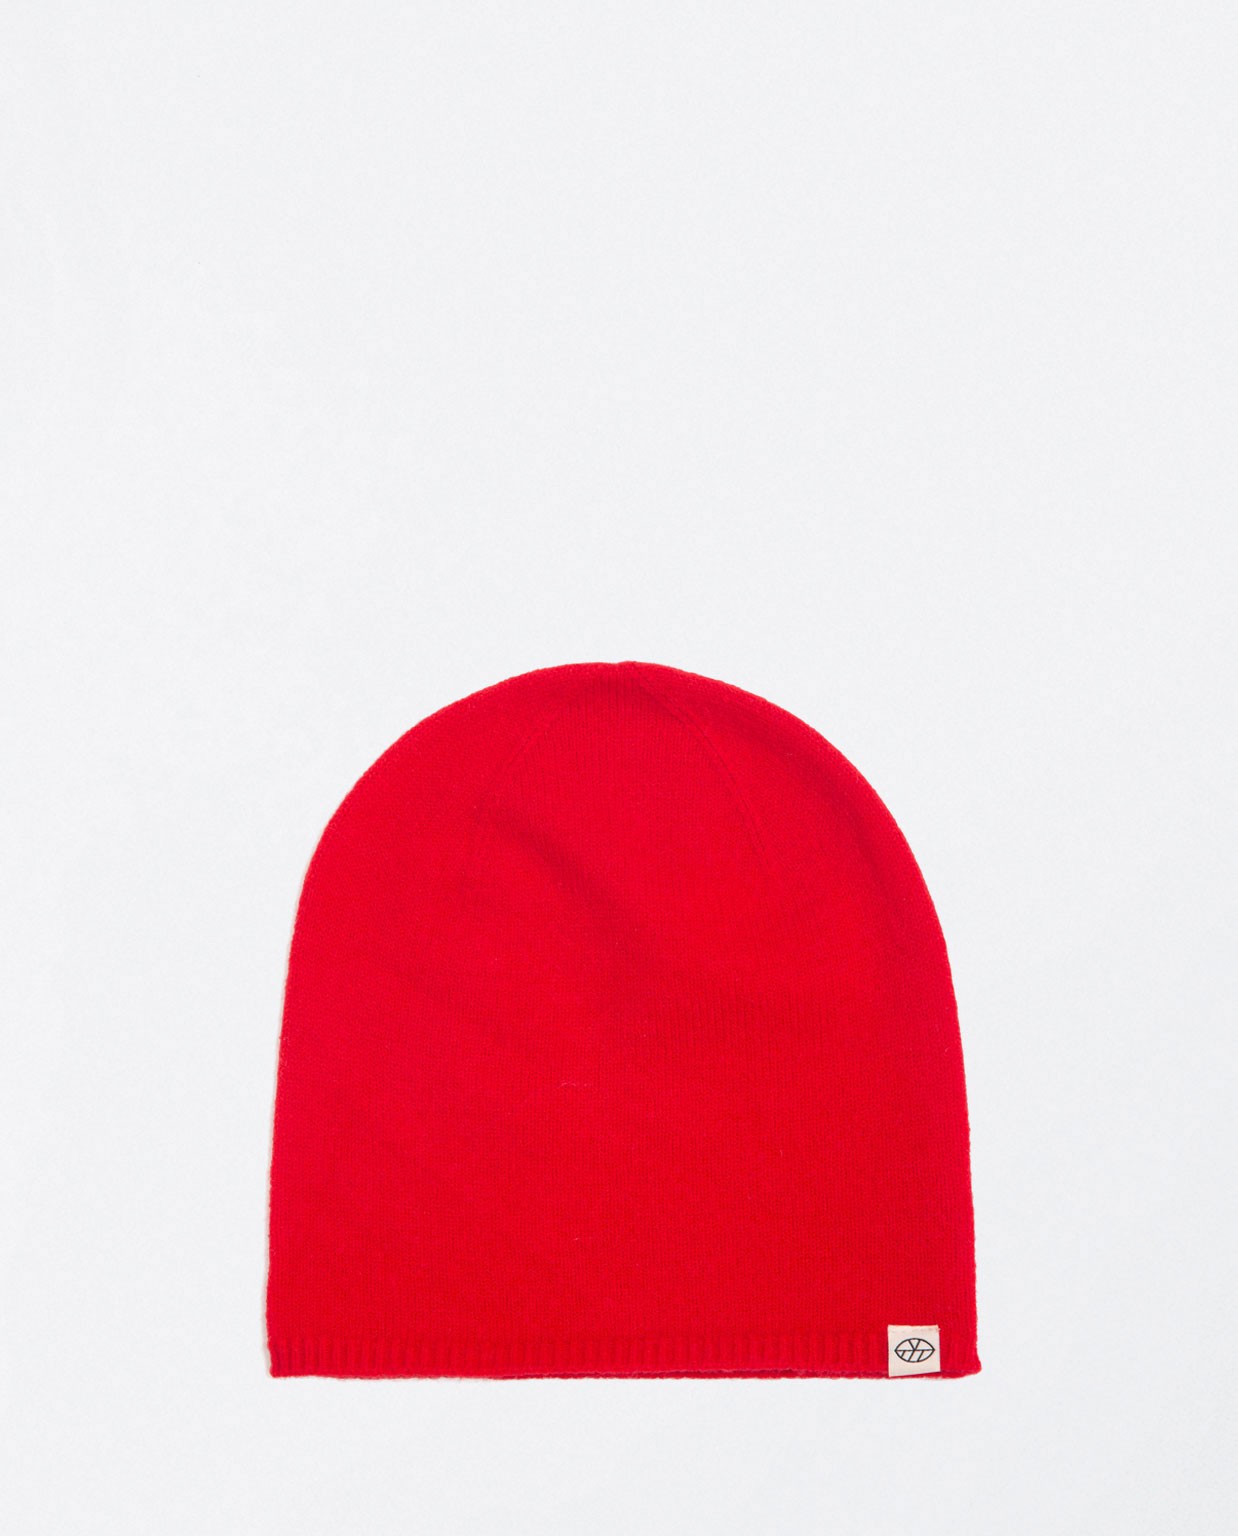 Knitted cap finished in plain rib Red